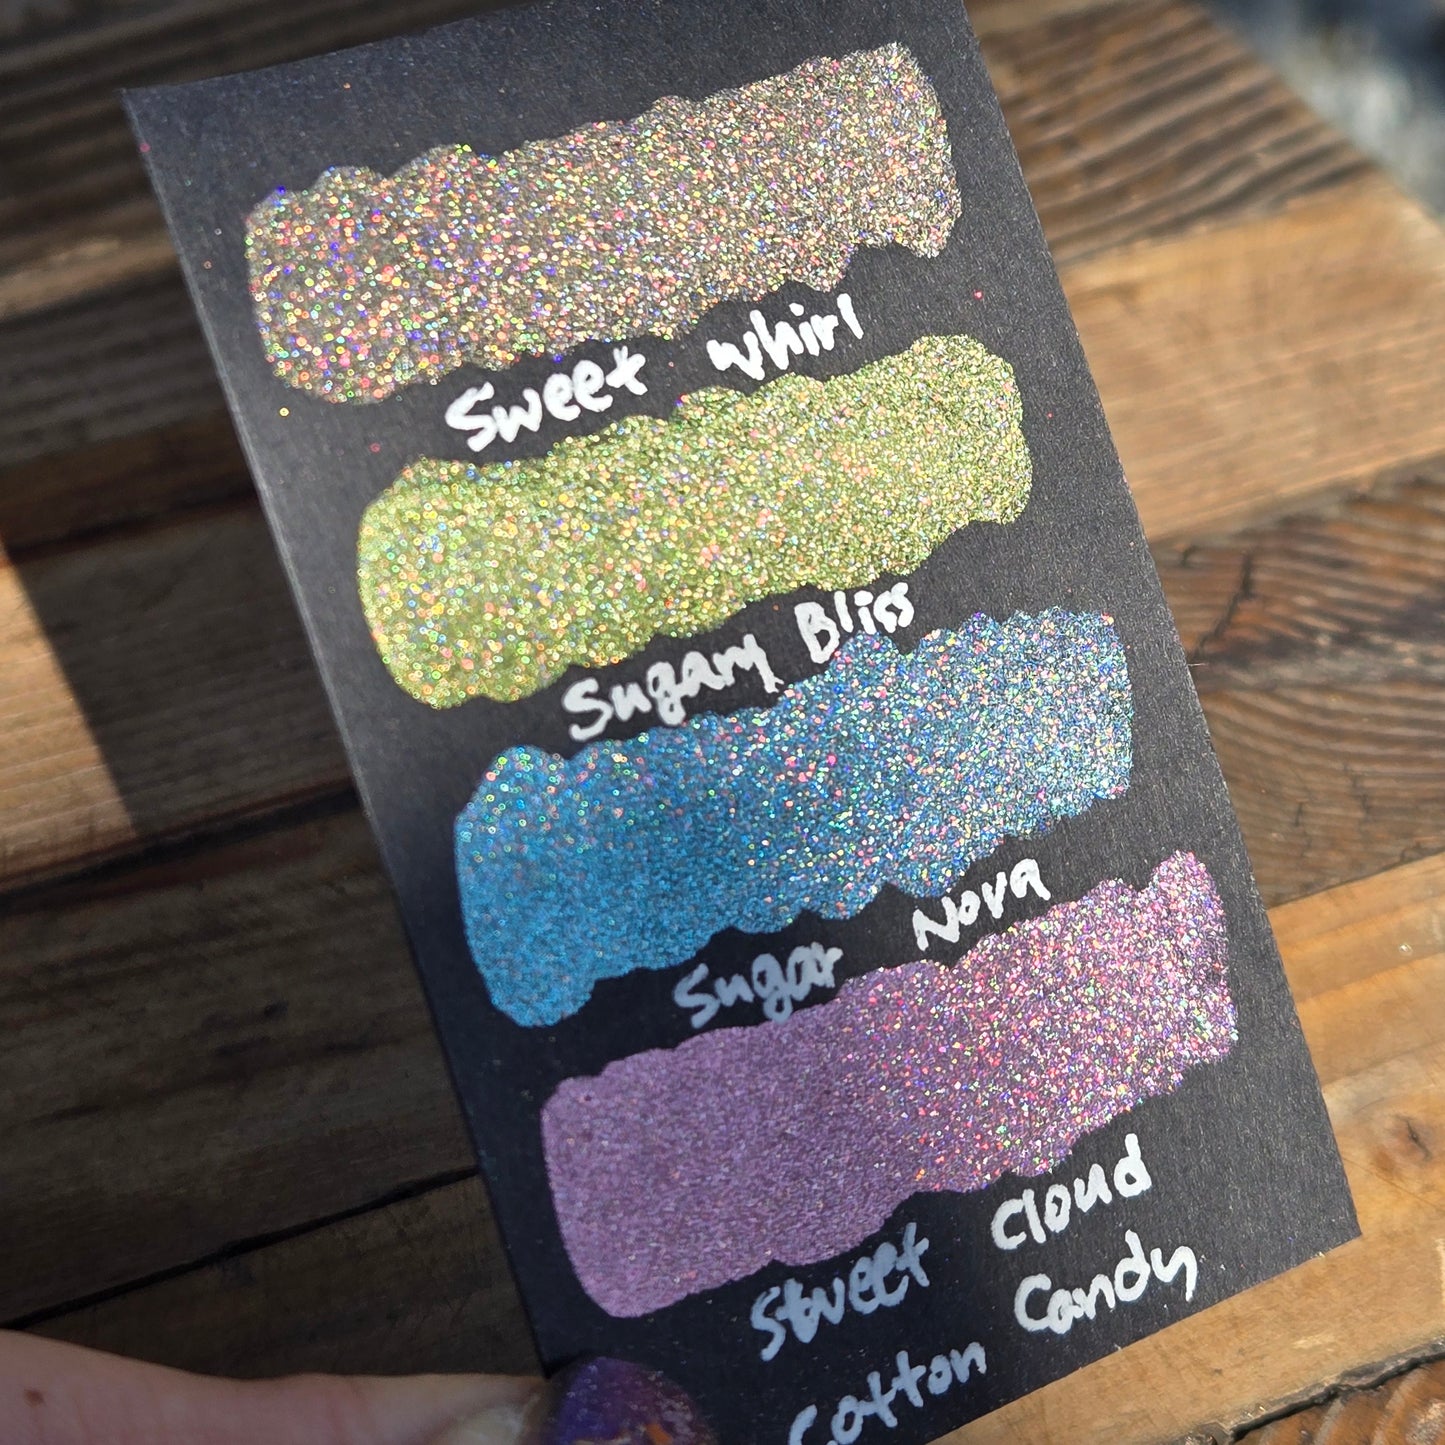 Sweet Whirl Half Pan Cotton Candy Handmade Chrome Shimmer Holographic Watercolor Paints by iuilewatercolors